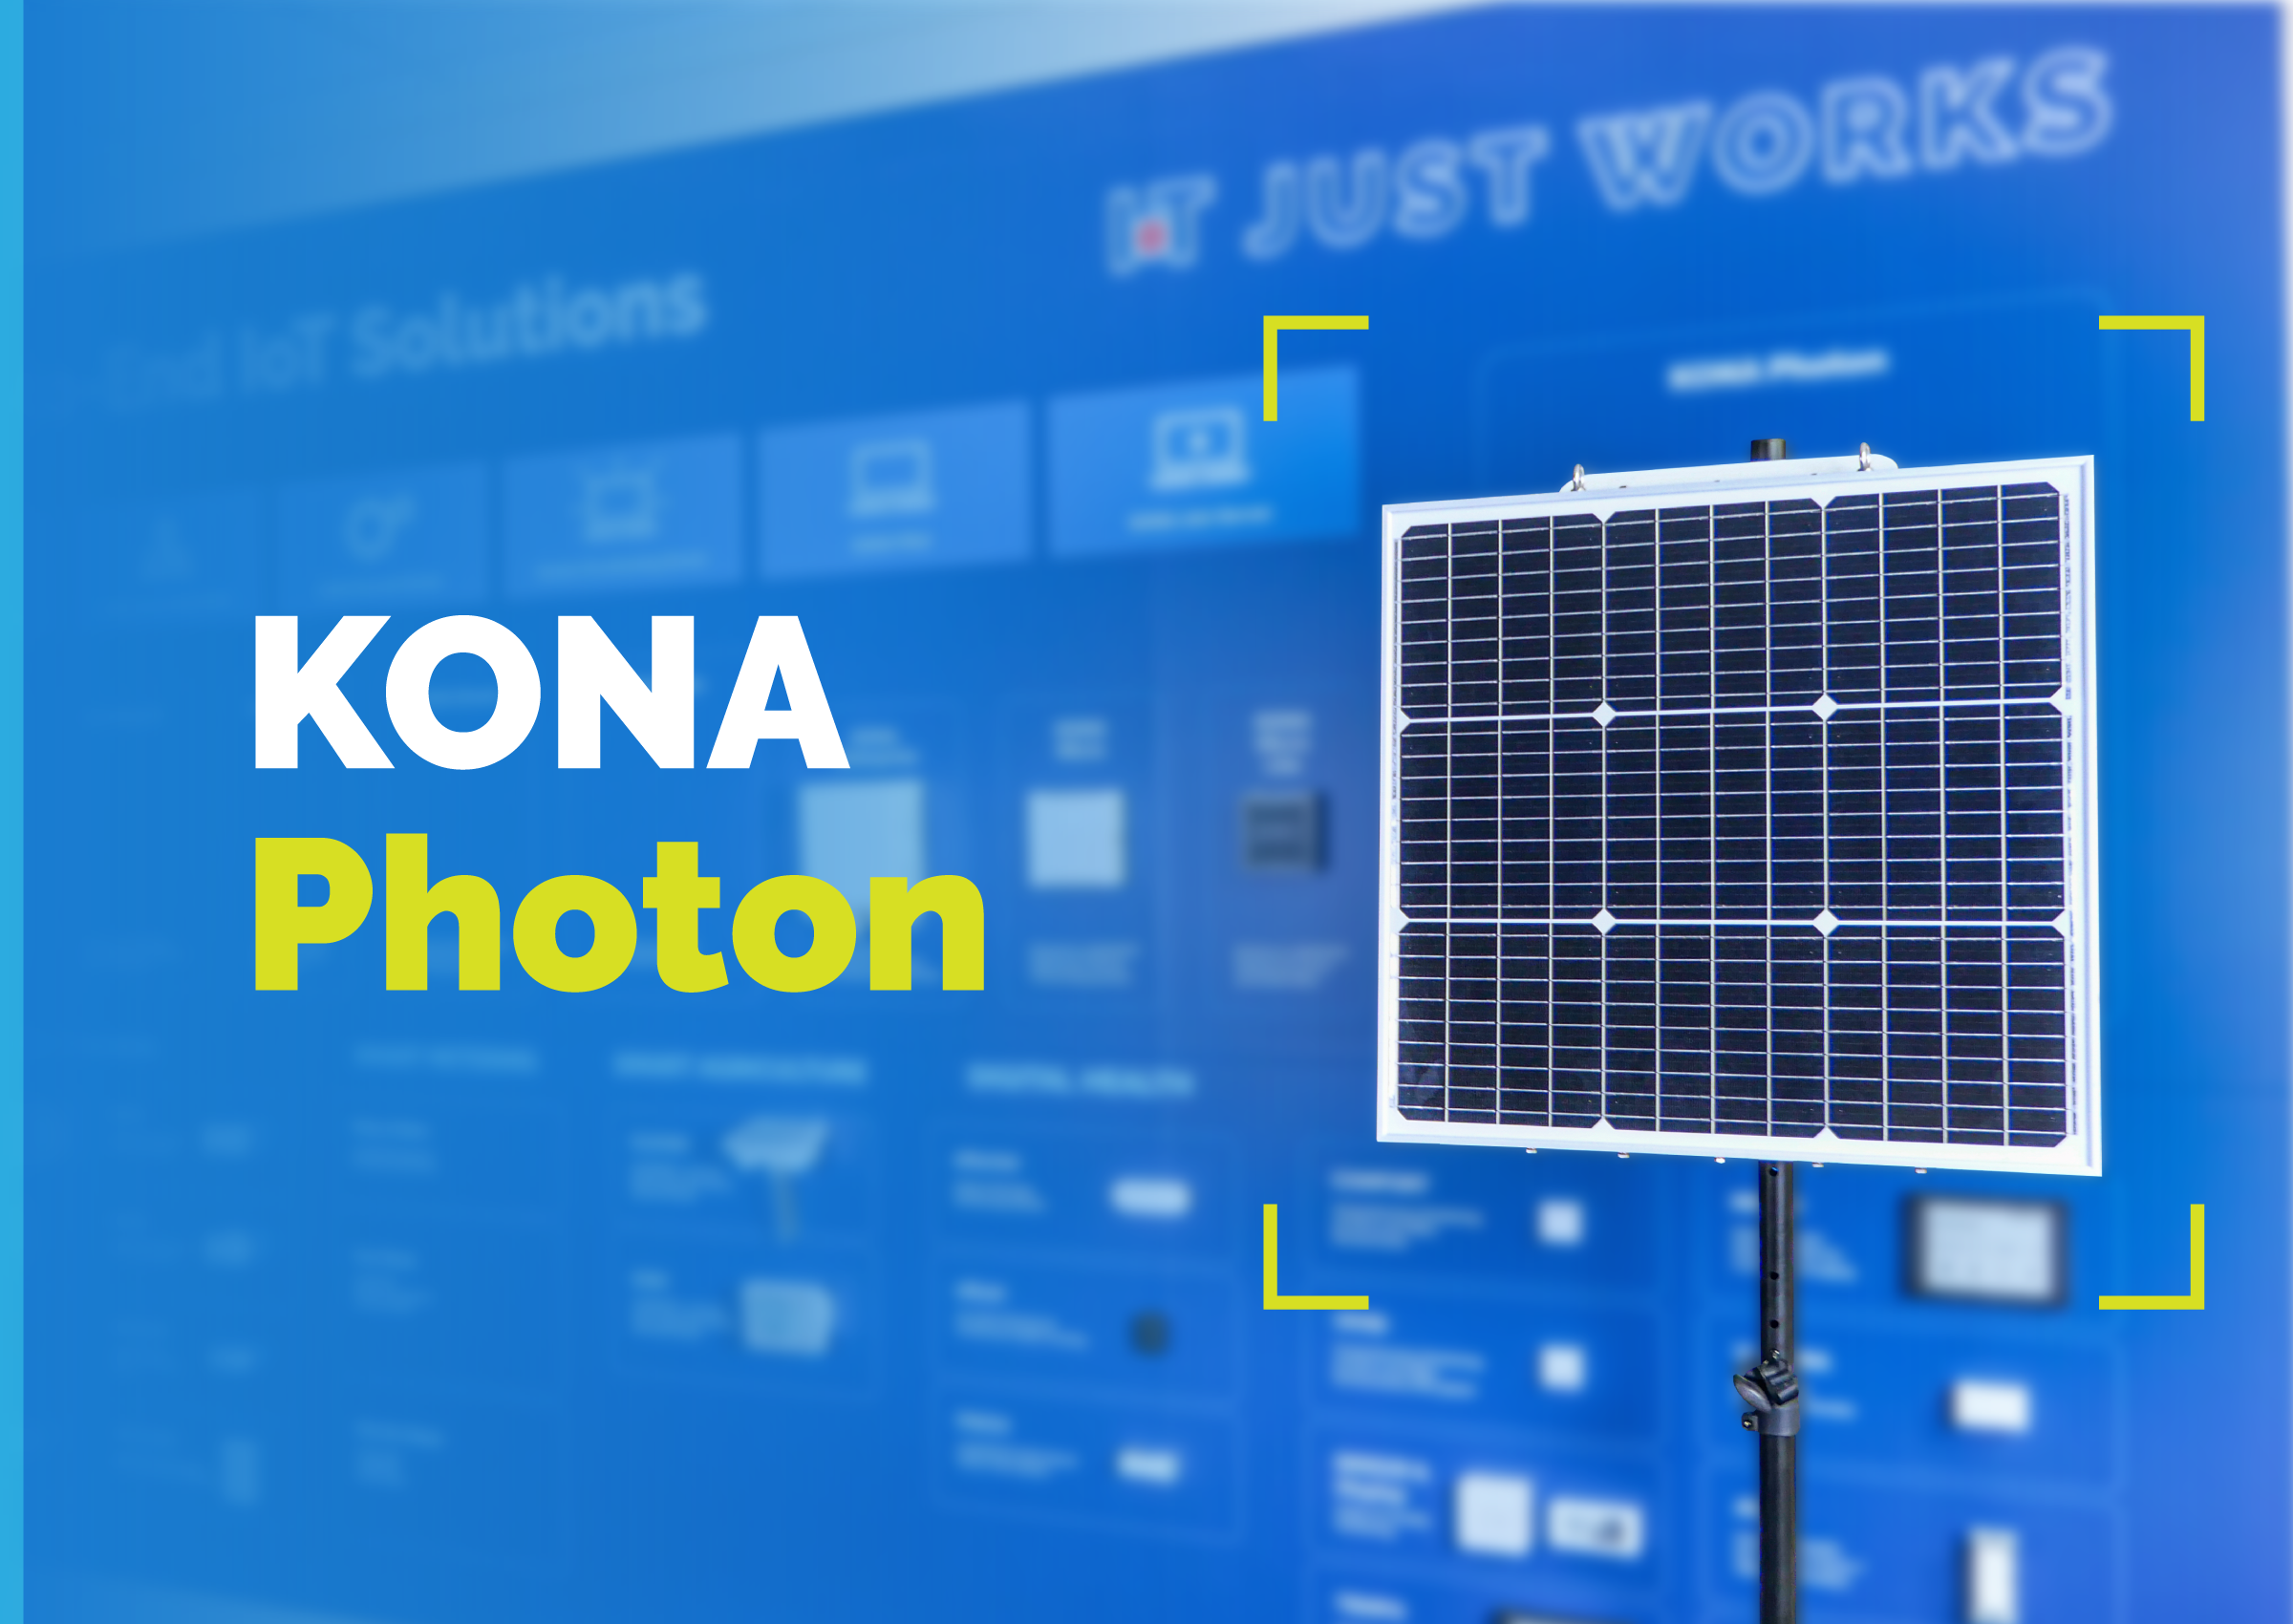 KONA PHOTON: Customer Value and Differentiation